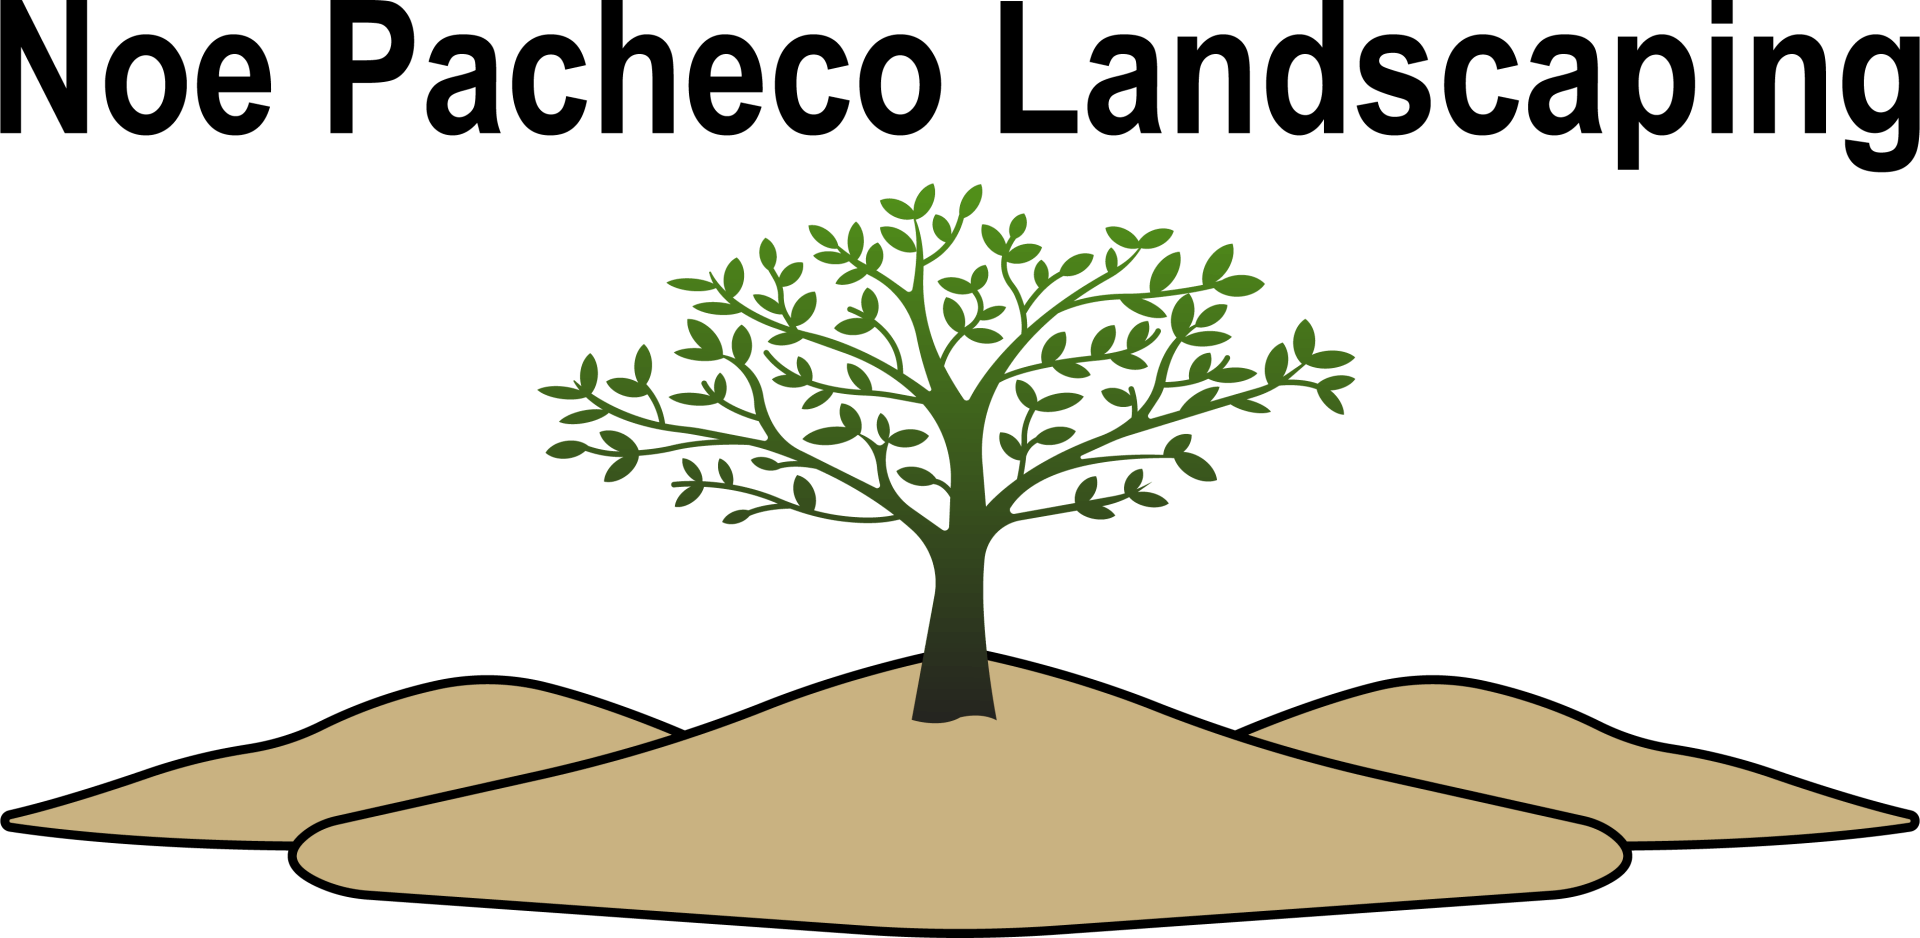 A logo for noe pacheco landscaping with a tree on a hill